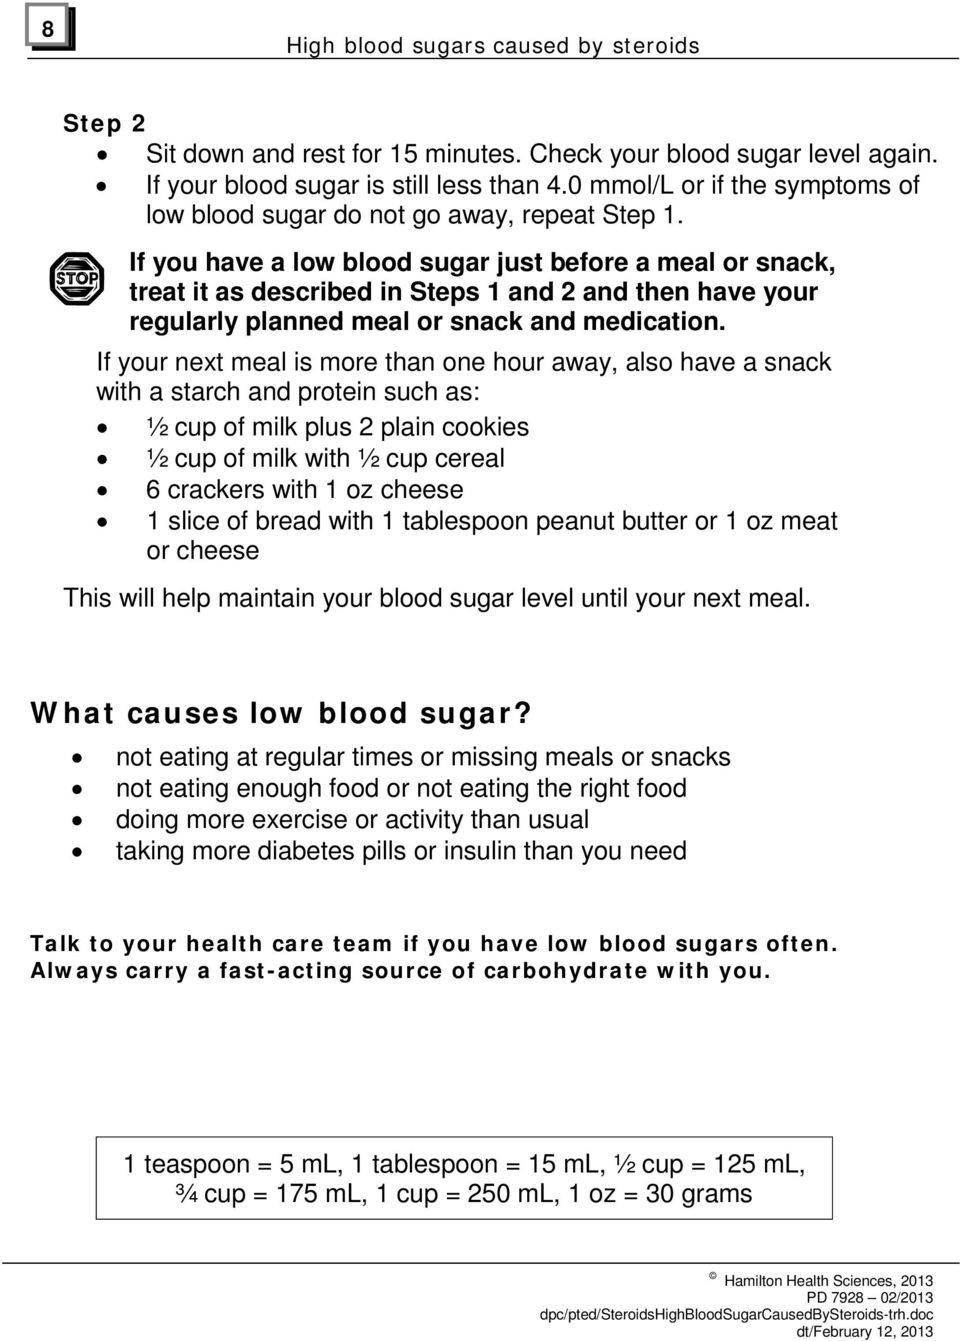 If you have a low blood sugar just before a meal or snack, treat it as described in Steps 1 and 2 and then have your regularly planned meal or snack and medication.